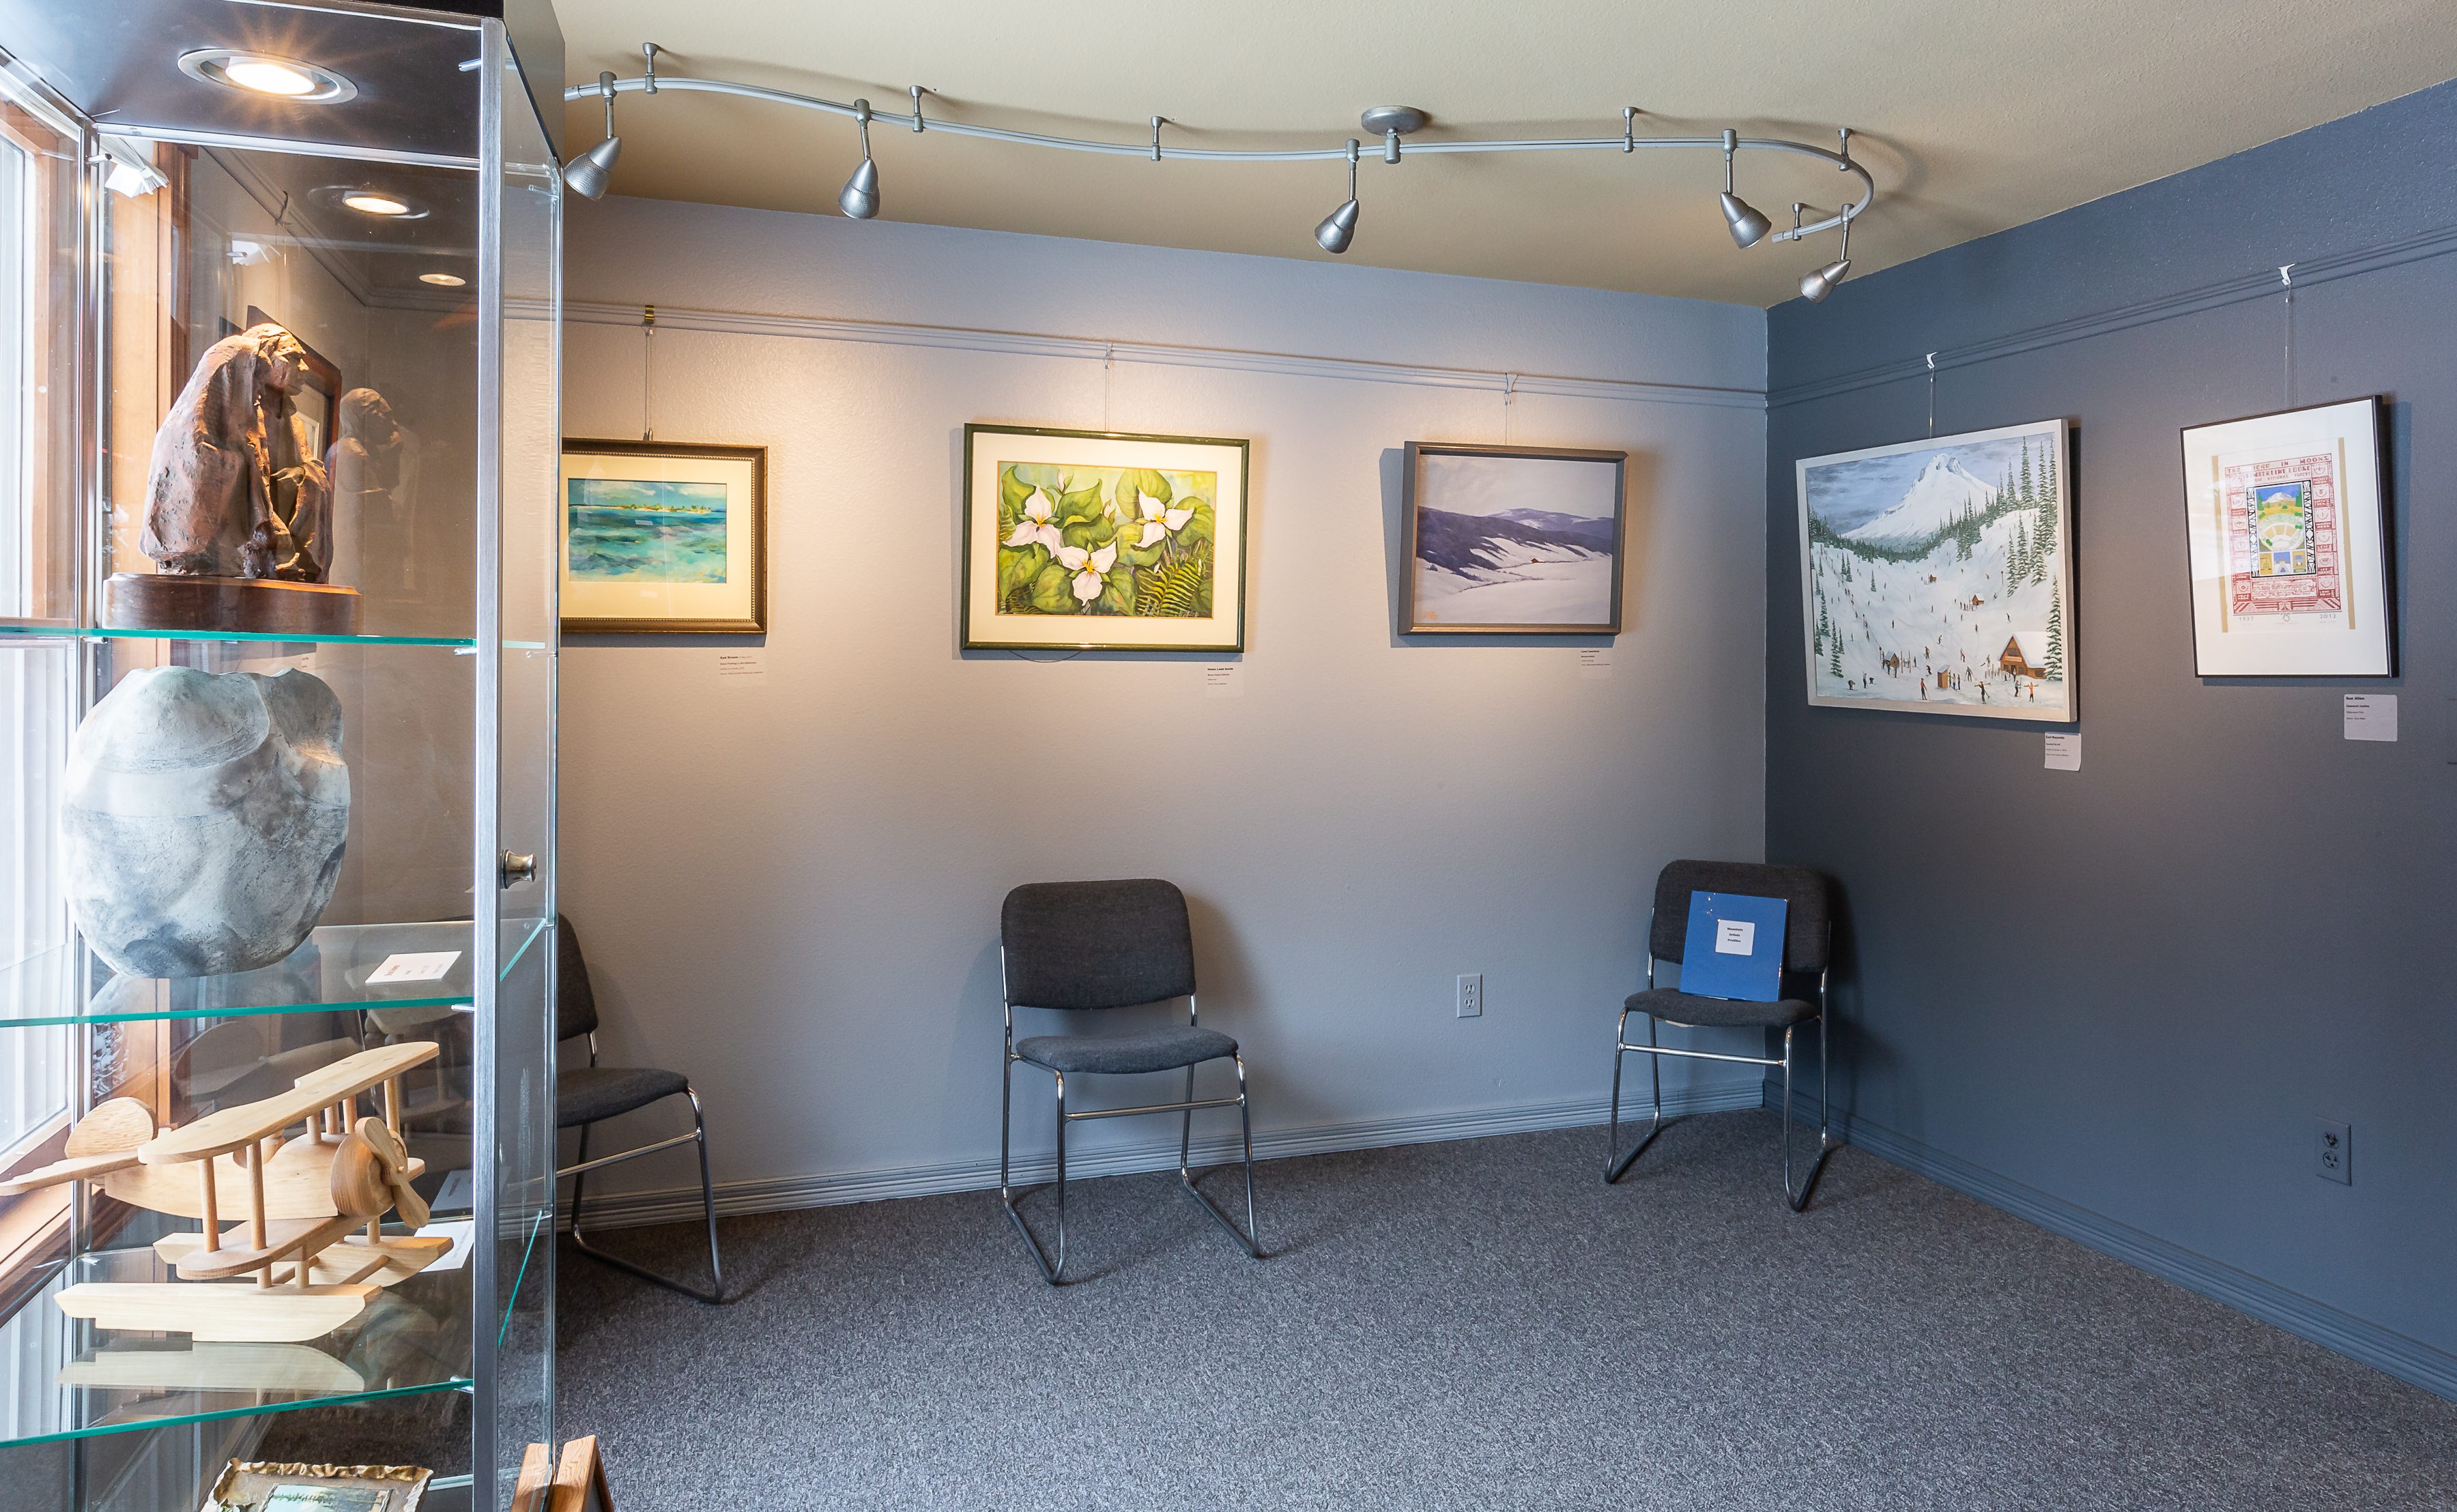 This gallery is a tribute to Mount Hood area artists, past and present.
The art displayed is all from the museum’s collection and was donated by the artist or a museum patron, to inspire others to appreciate fine arts.